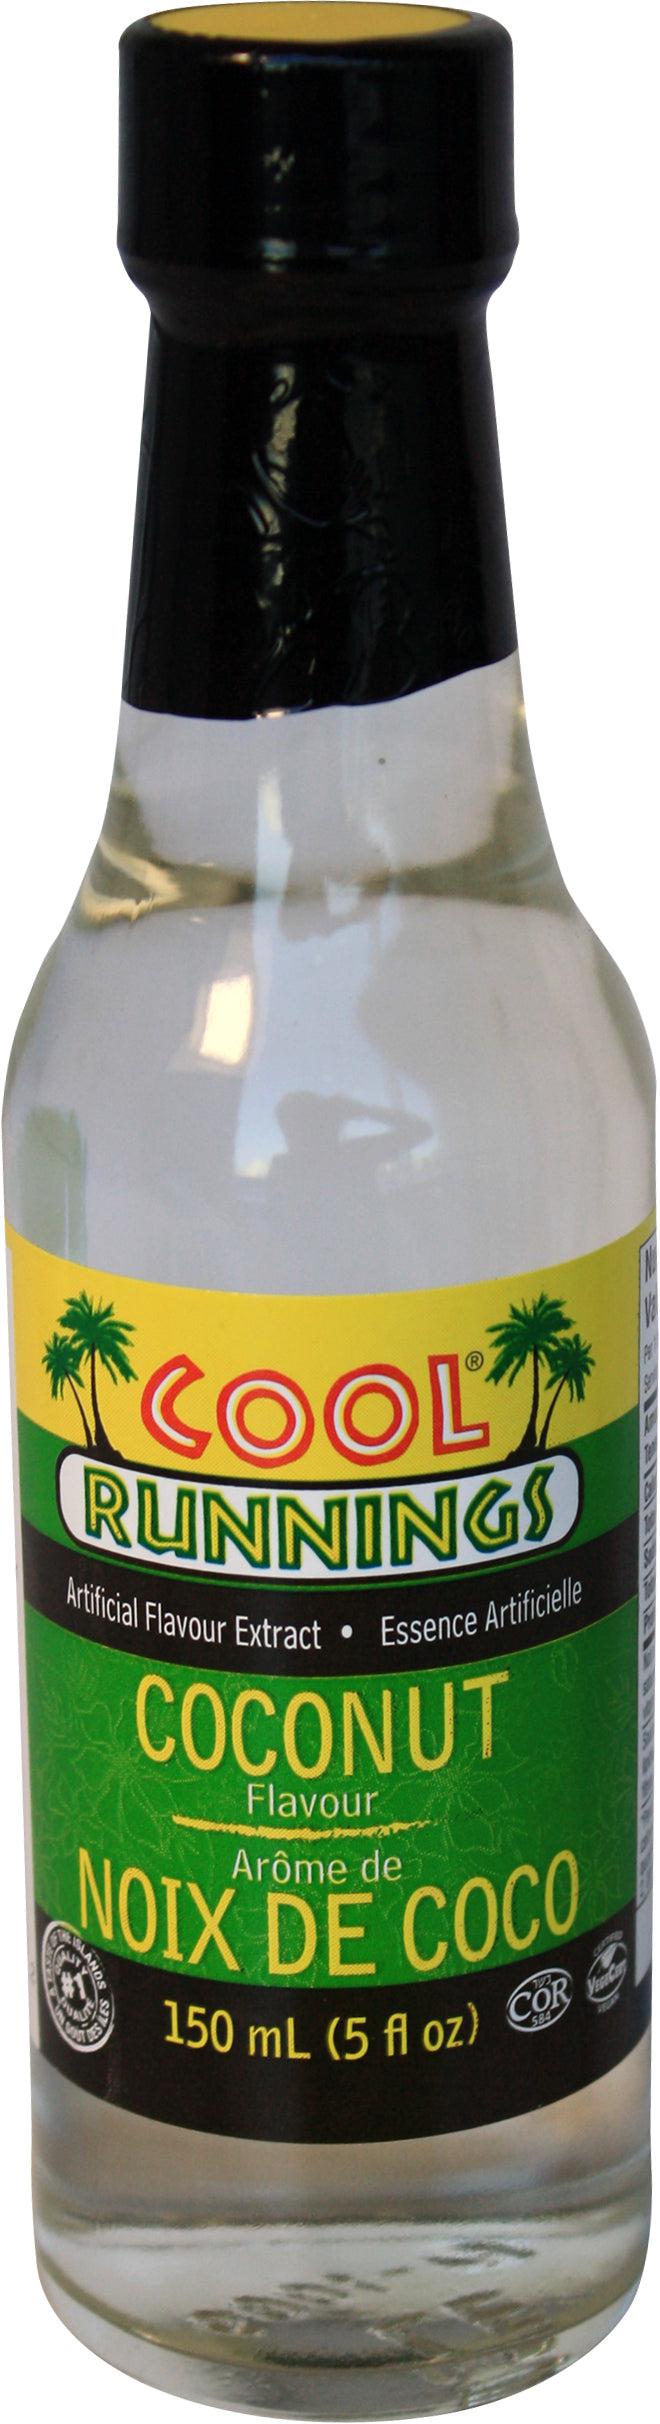 Cool Runnings - Coconut Extract